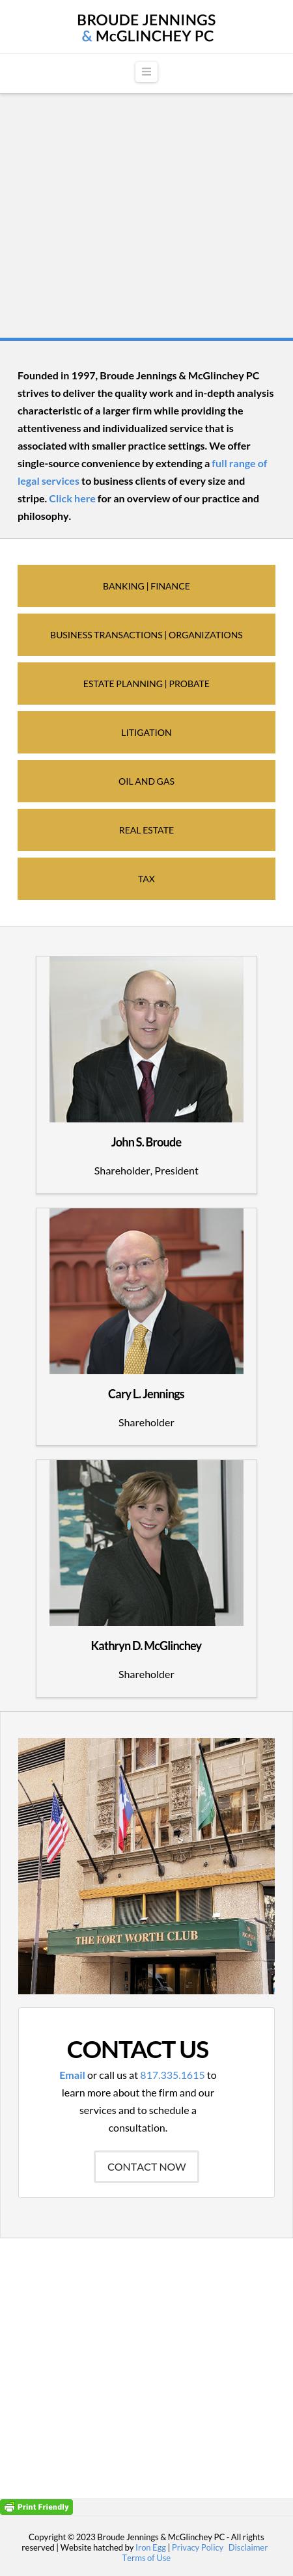 Broude, Smith & Jennings, P.C. - Fort Worth TX Lawyers